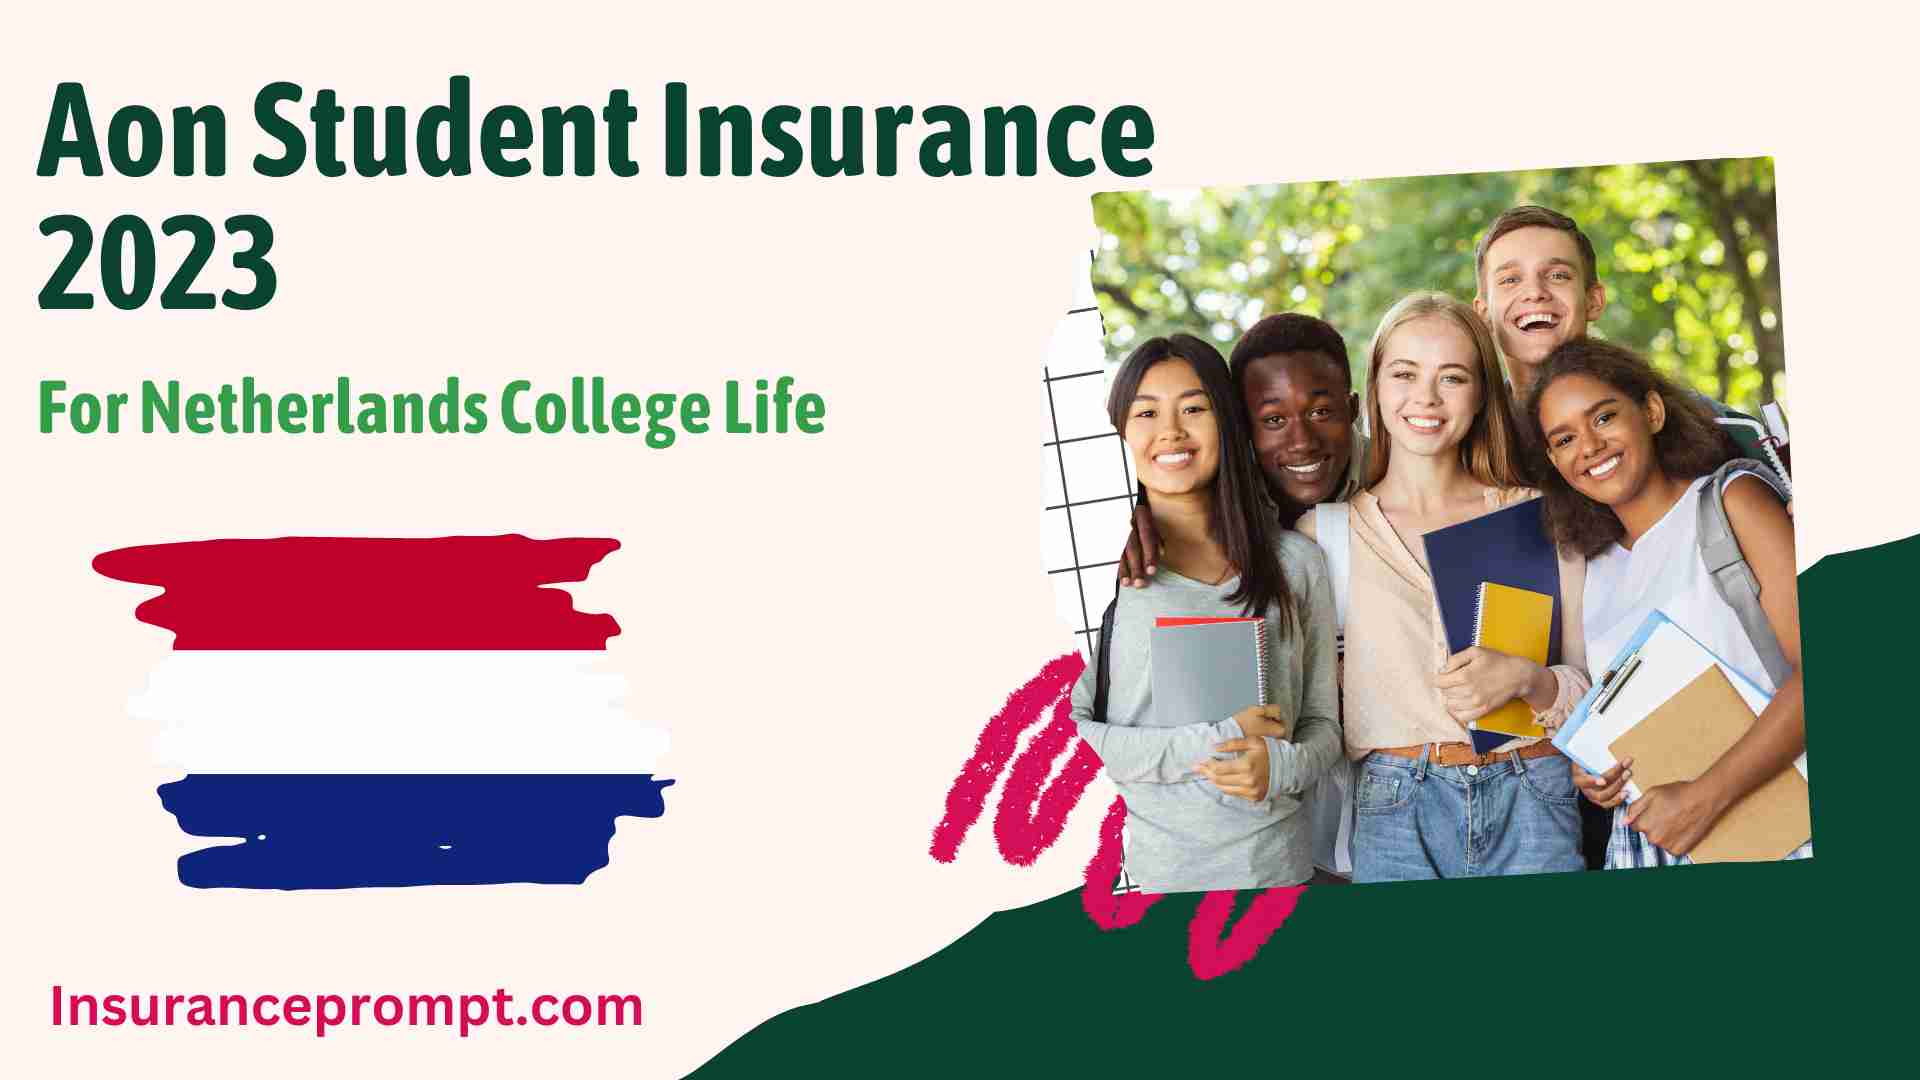 Aon Student Insurance 2023: Secure Your Study Abroad